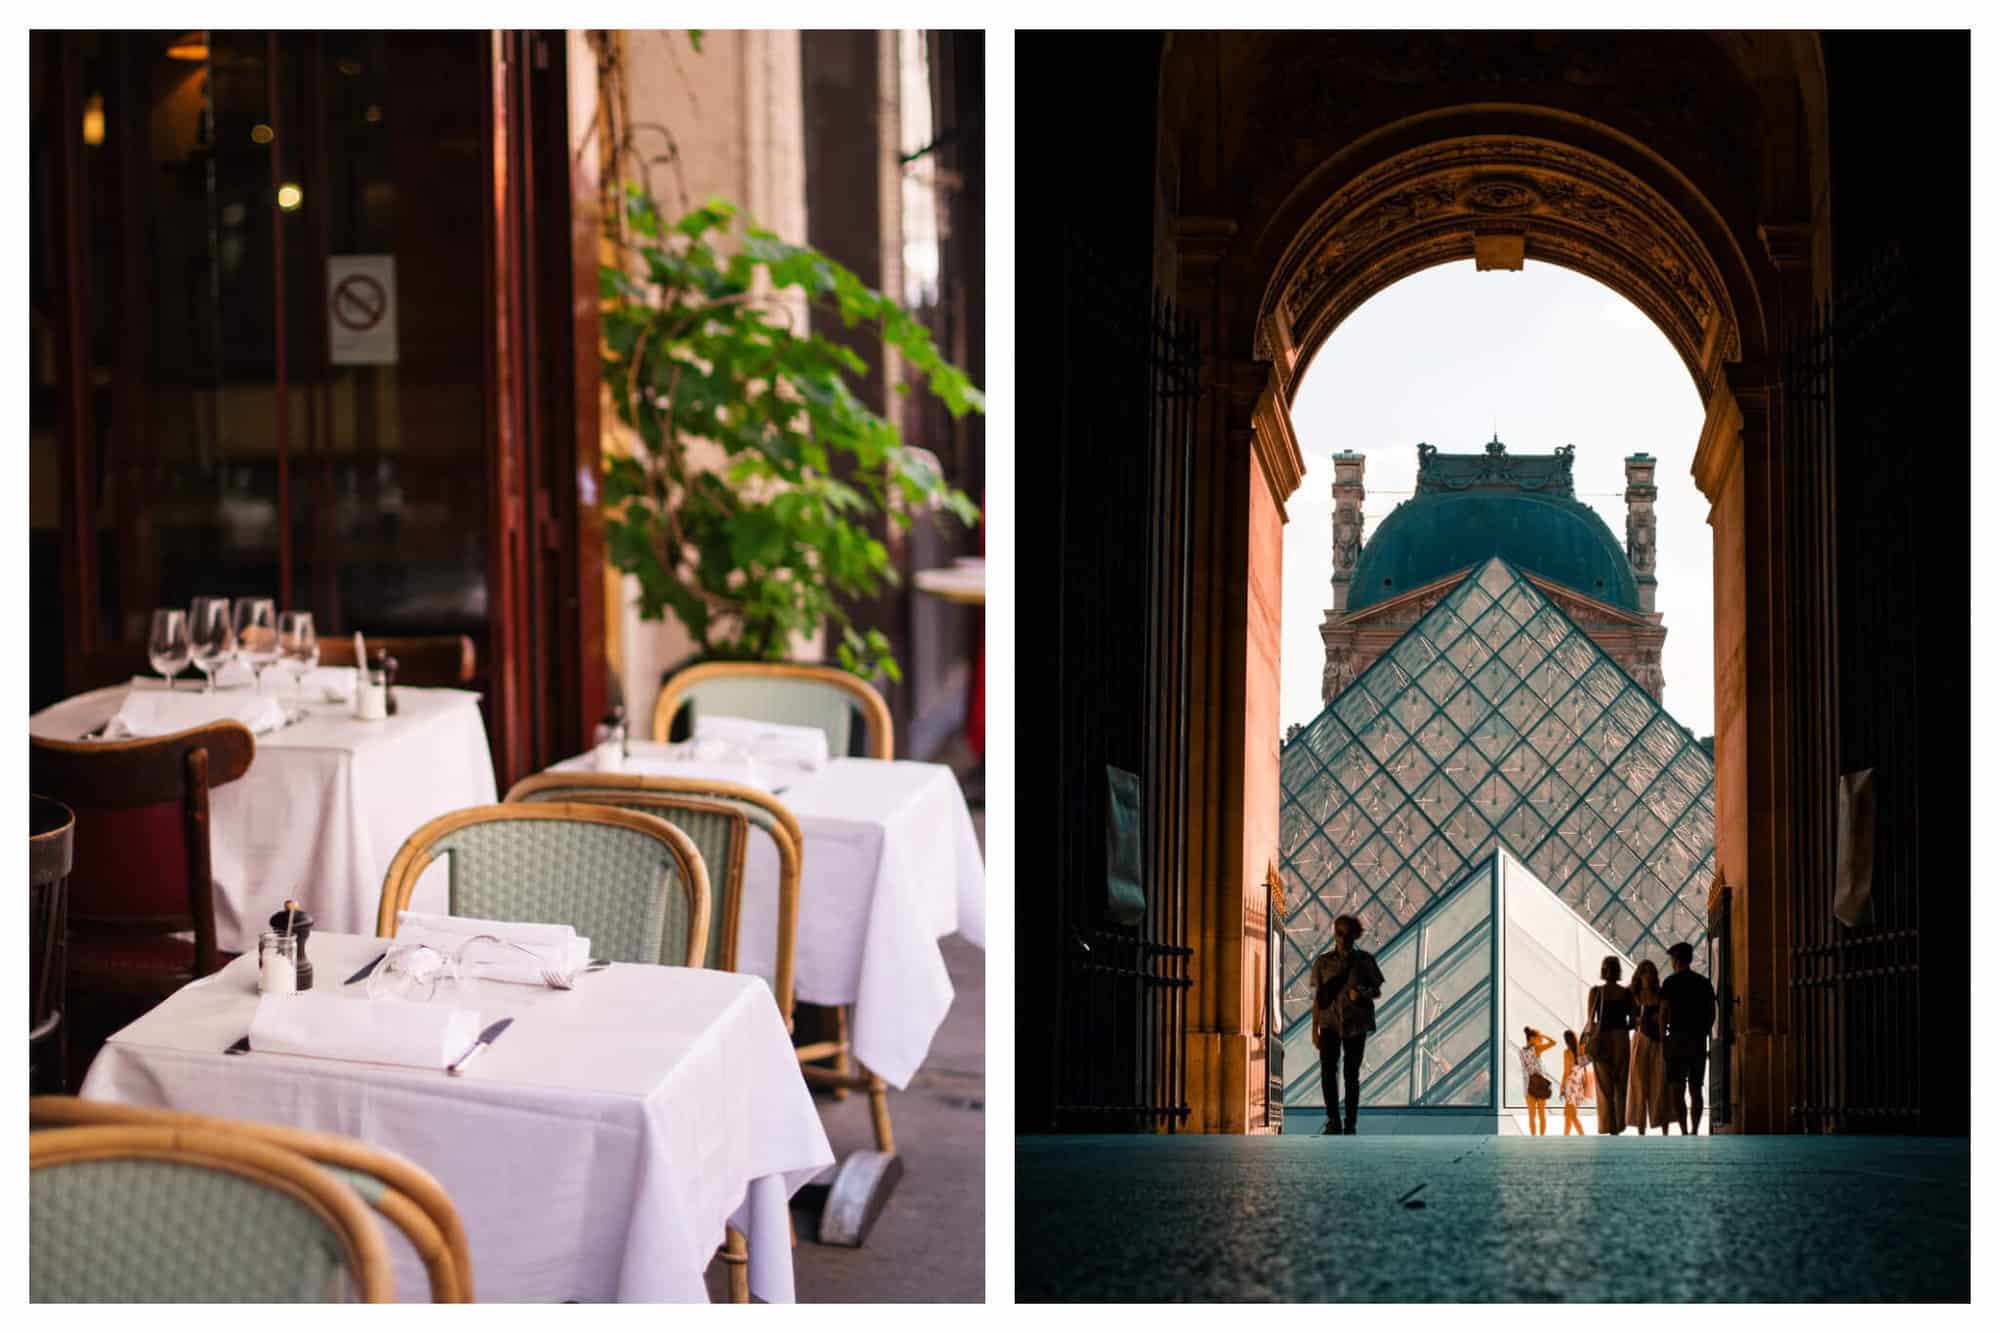 Left: a photo of three terrace tables set on a Paris terrace waiting for customers. Right: a photo of the alleyways at the Louvre in front of the pyramid entrance. 